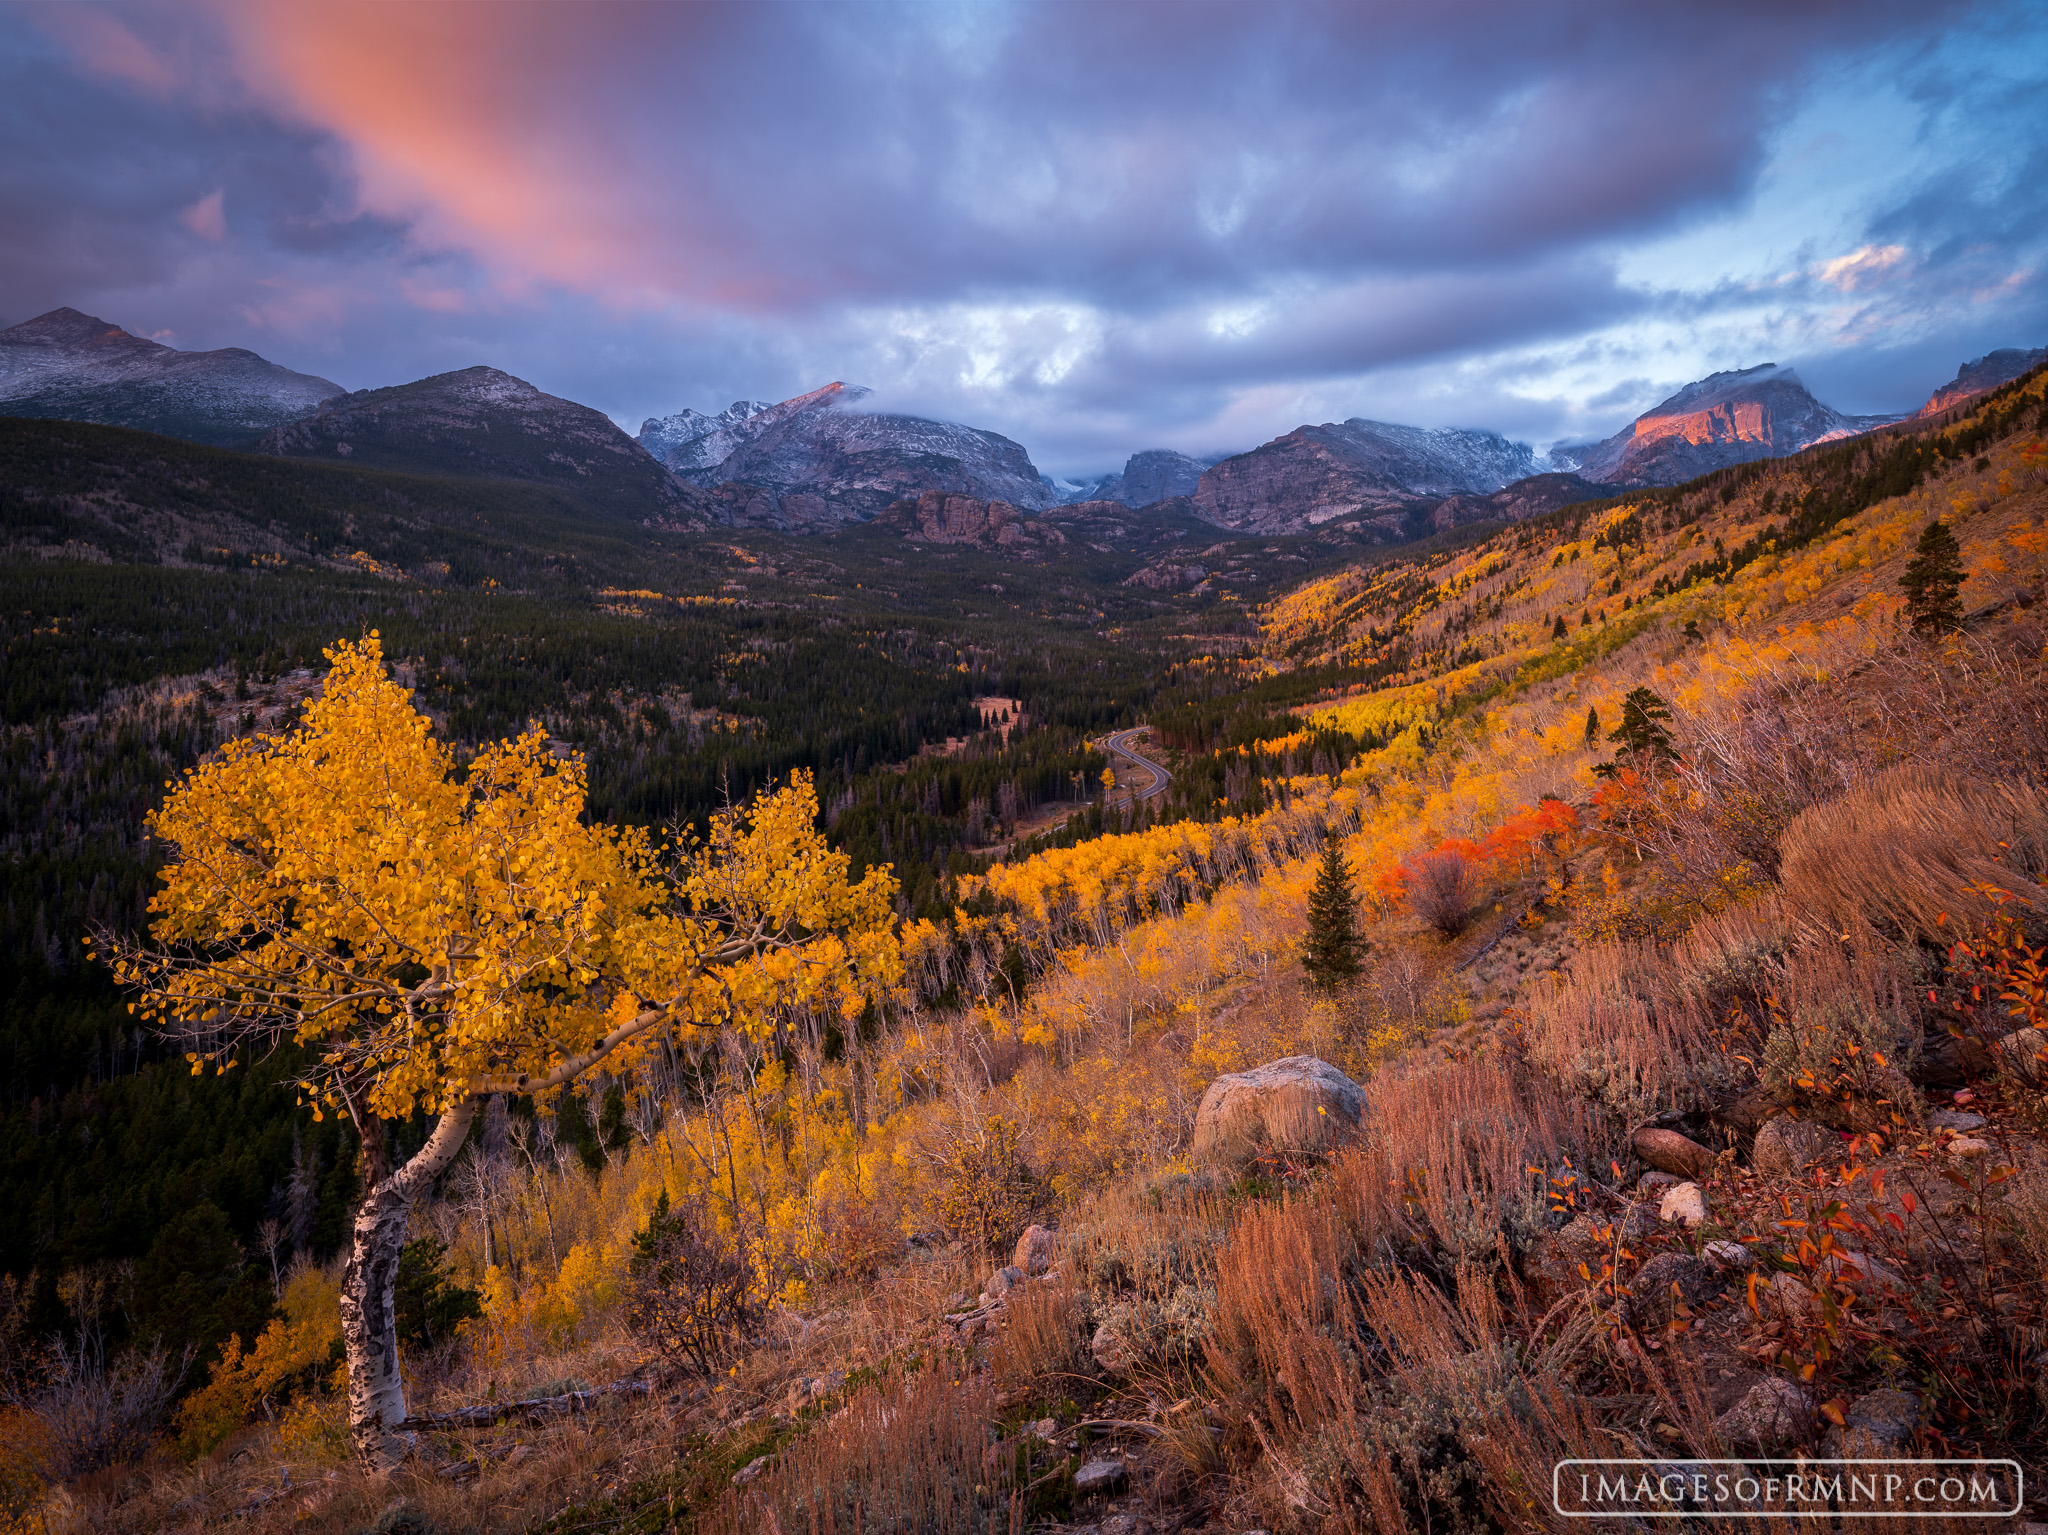 The sun peeked through the clouds and illuminated Hallett Peak as the aspen trees in their best autumn dress looked on. This...